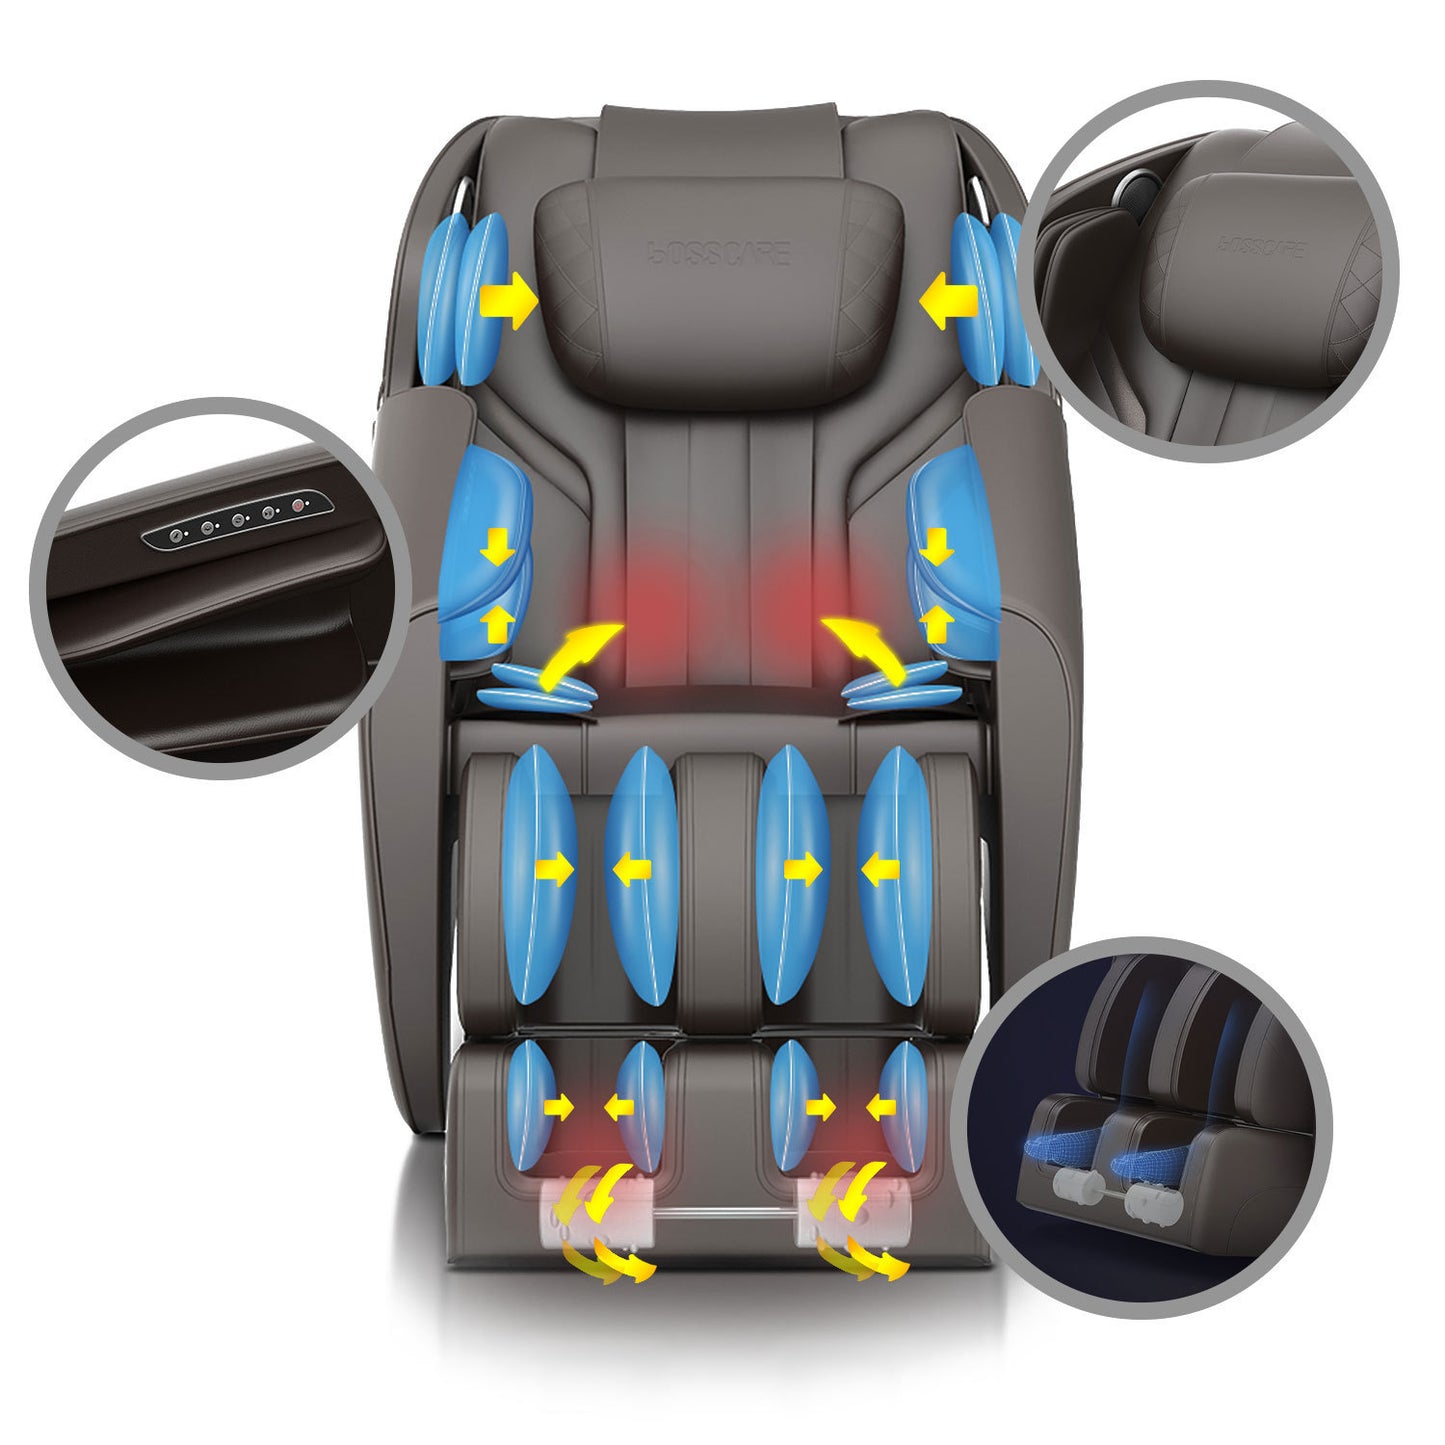 BOSSCARE Massage Chair Recliner with Zero Gravity Airbag Mas